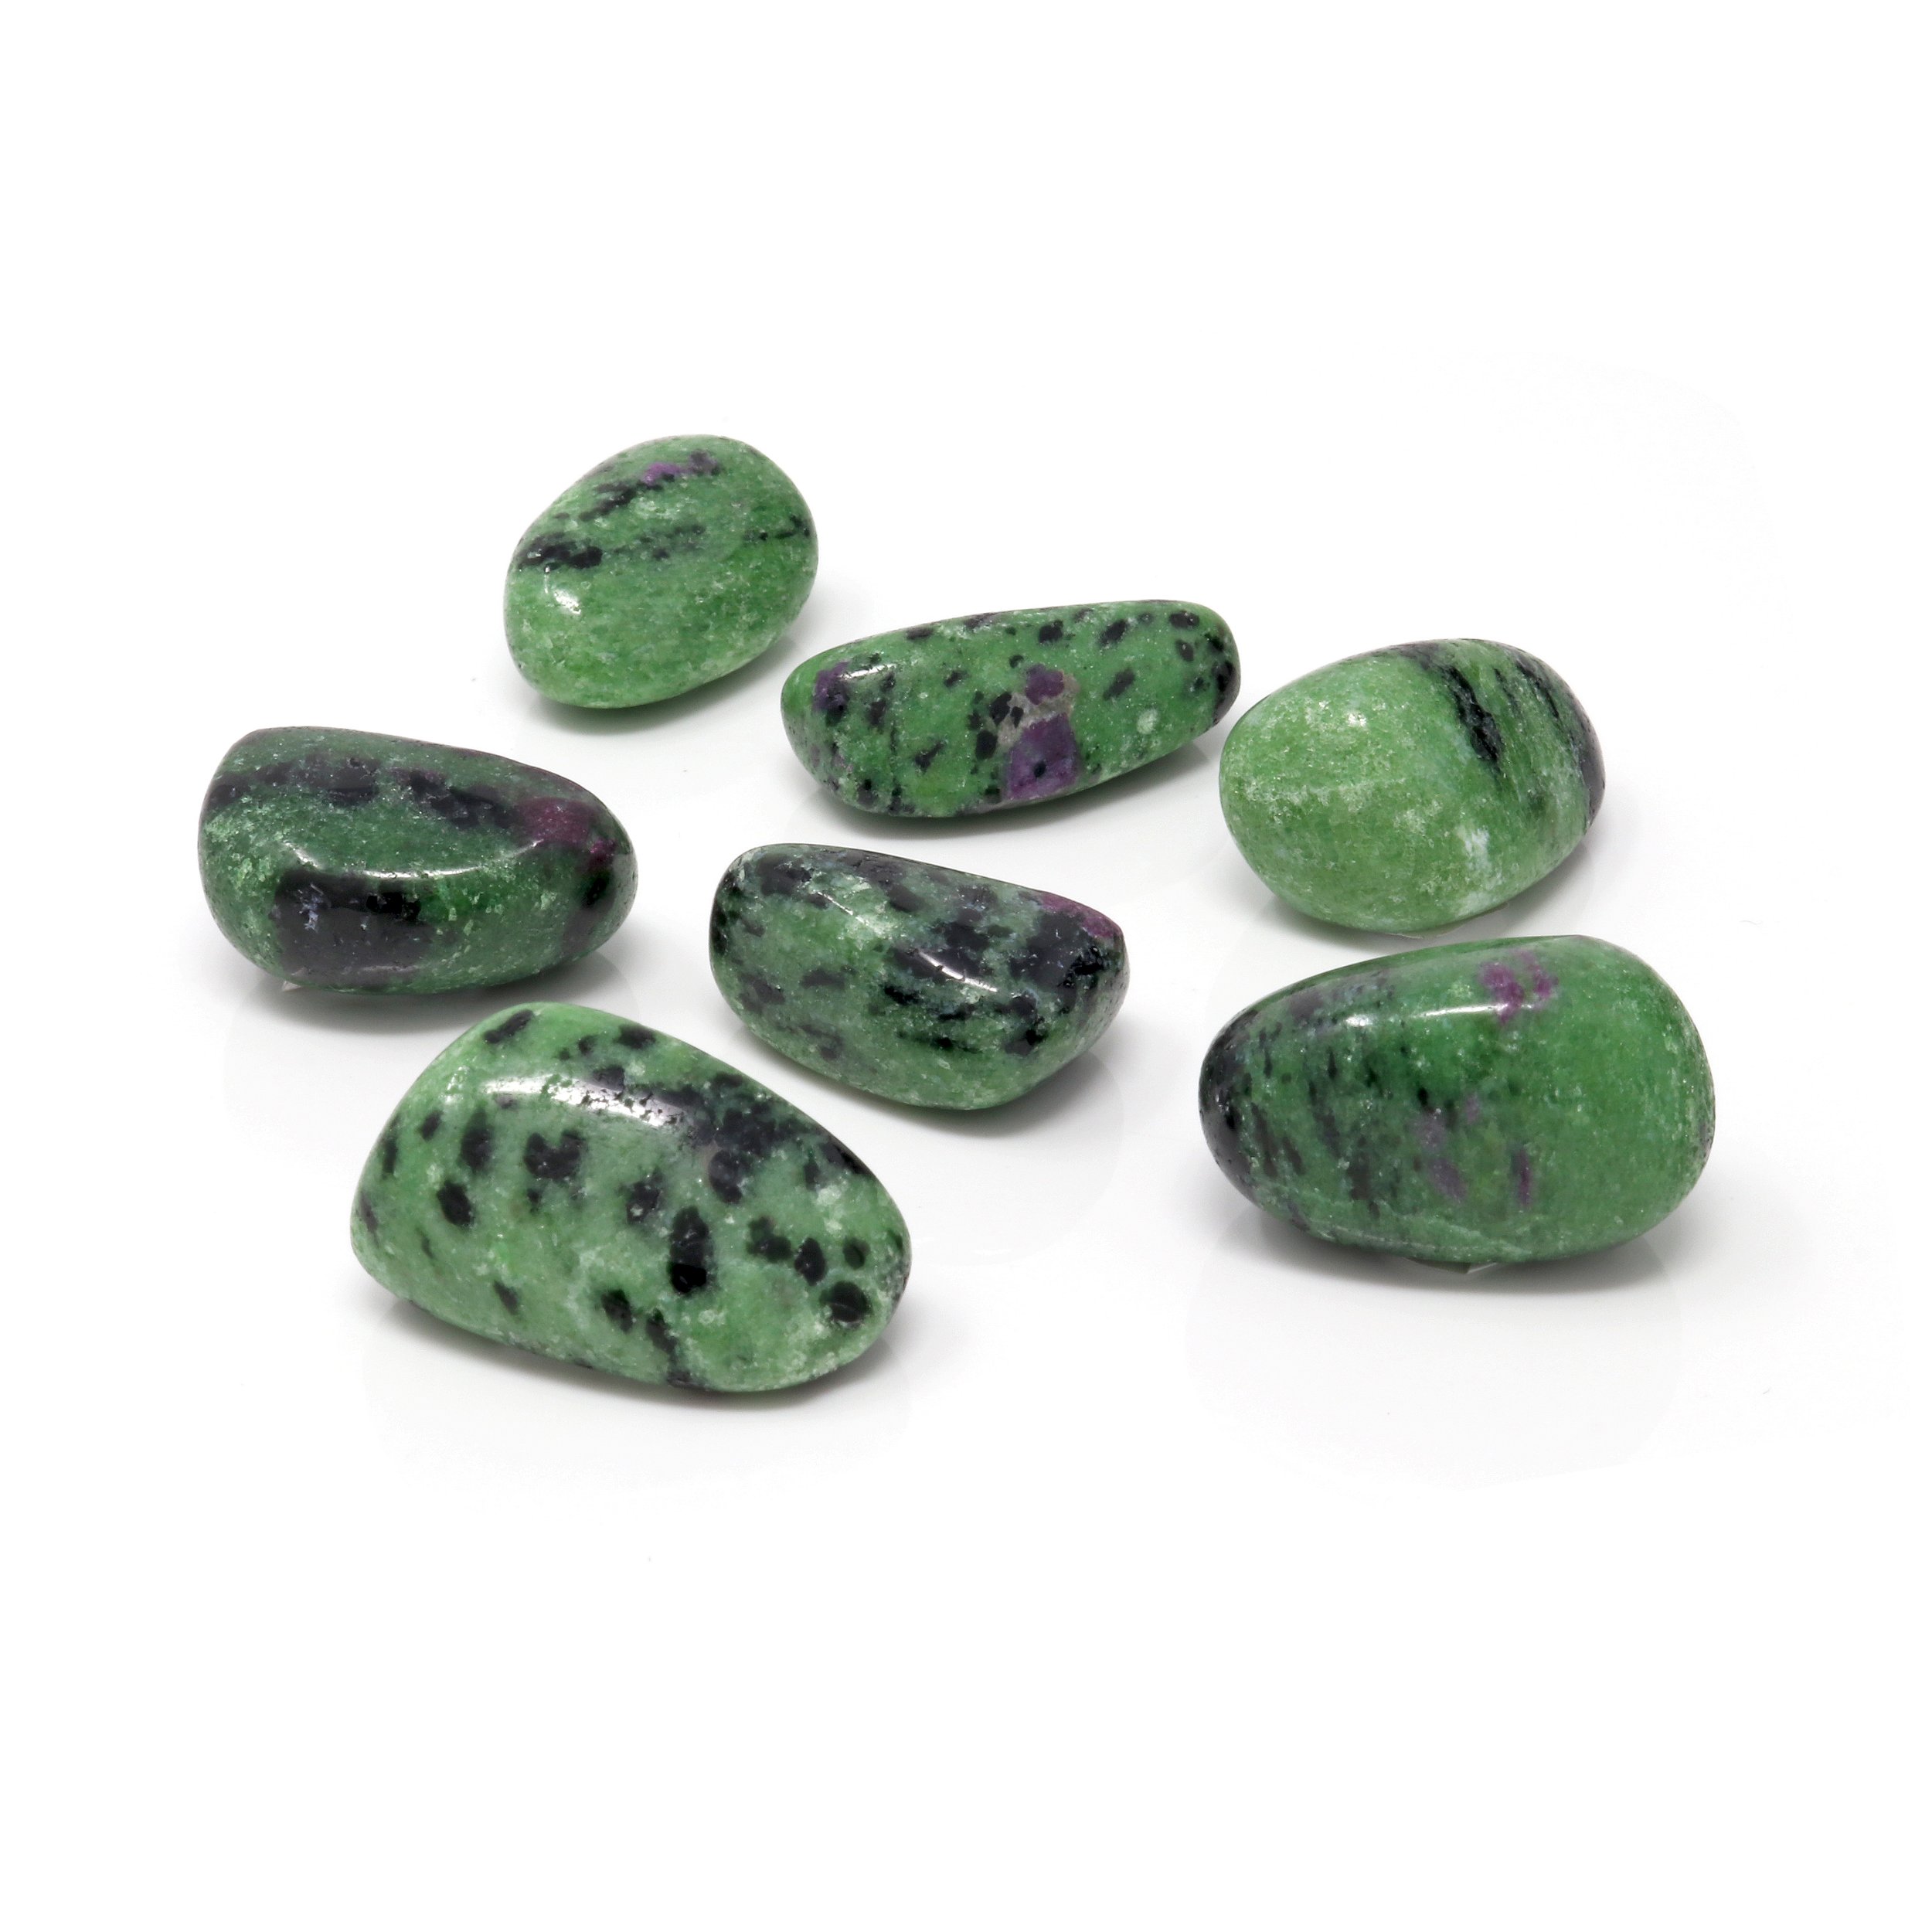 Tumbled Ruby Zoisite (Singles)